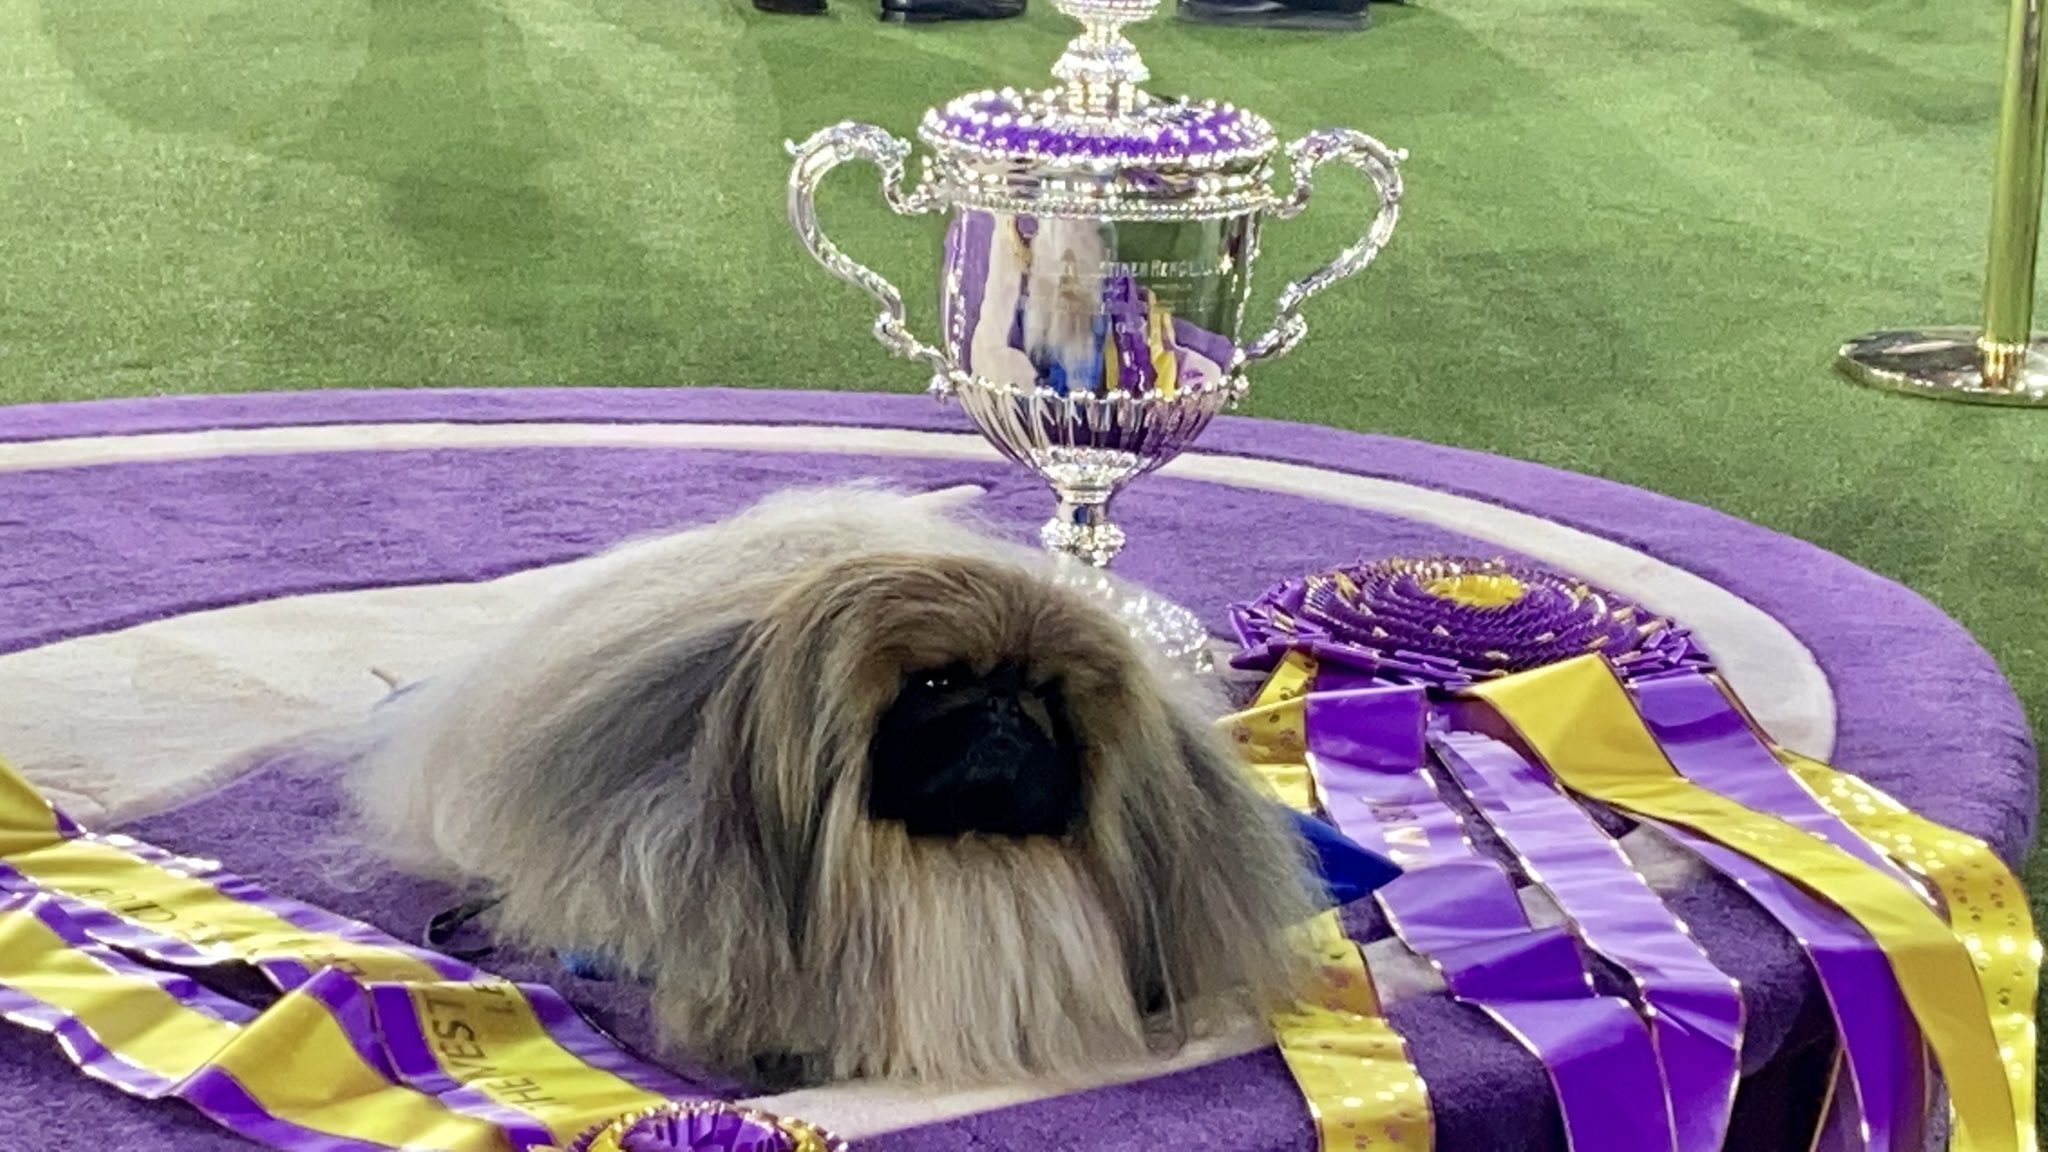 Best in show at the 2021 Westminster Kennel Club Dog Show goes to